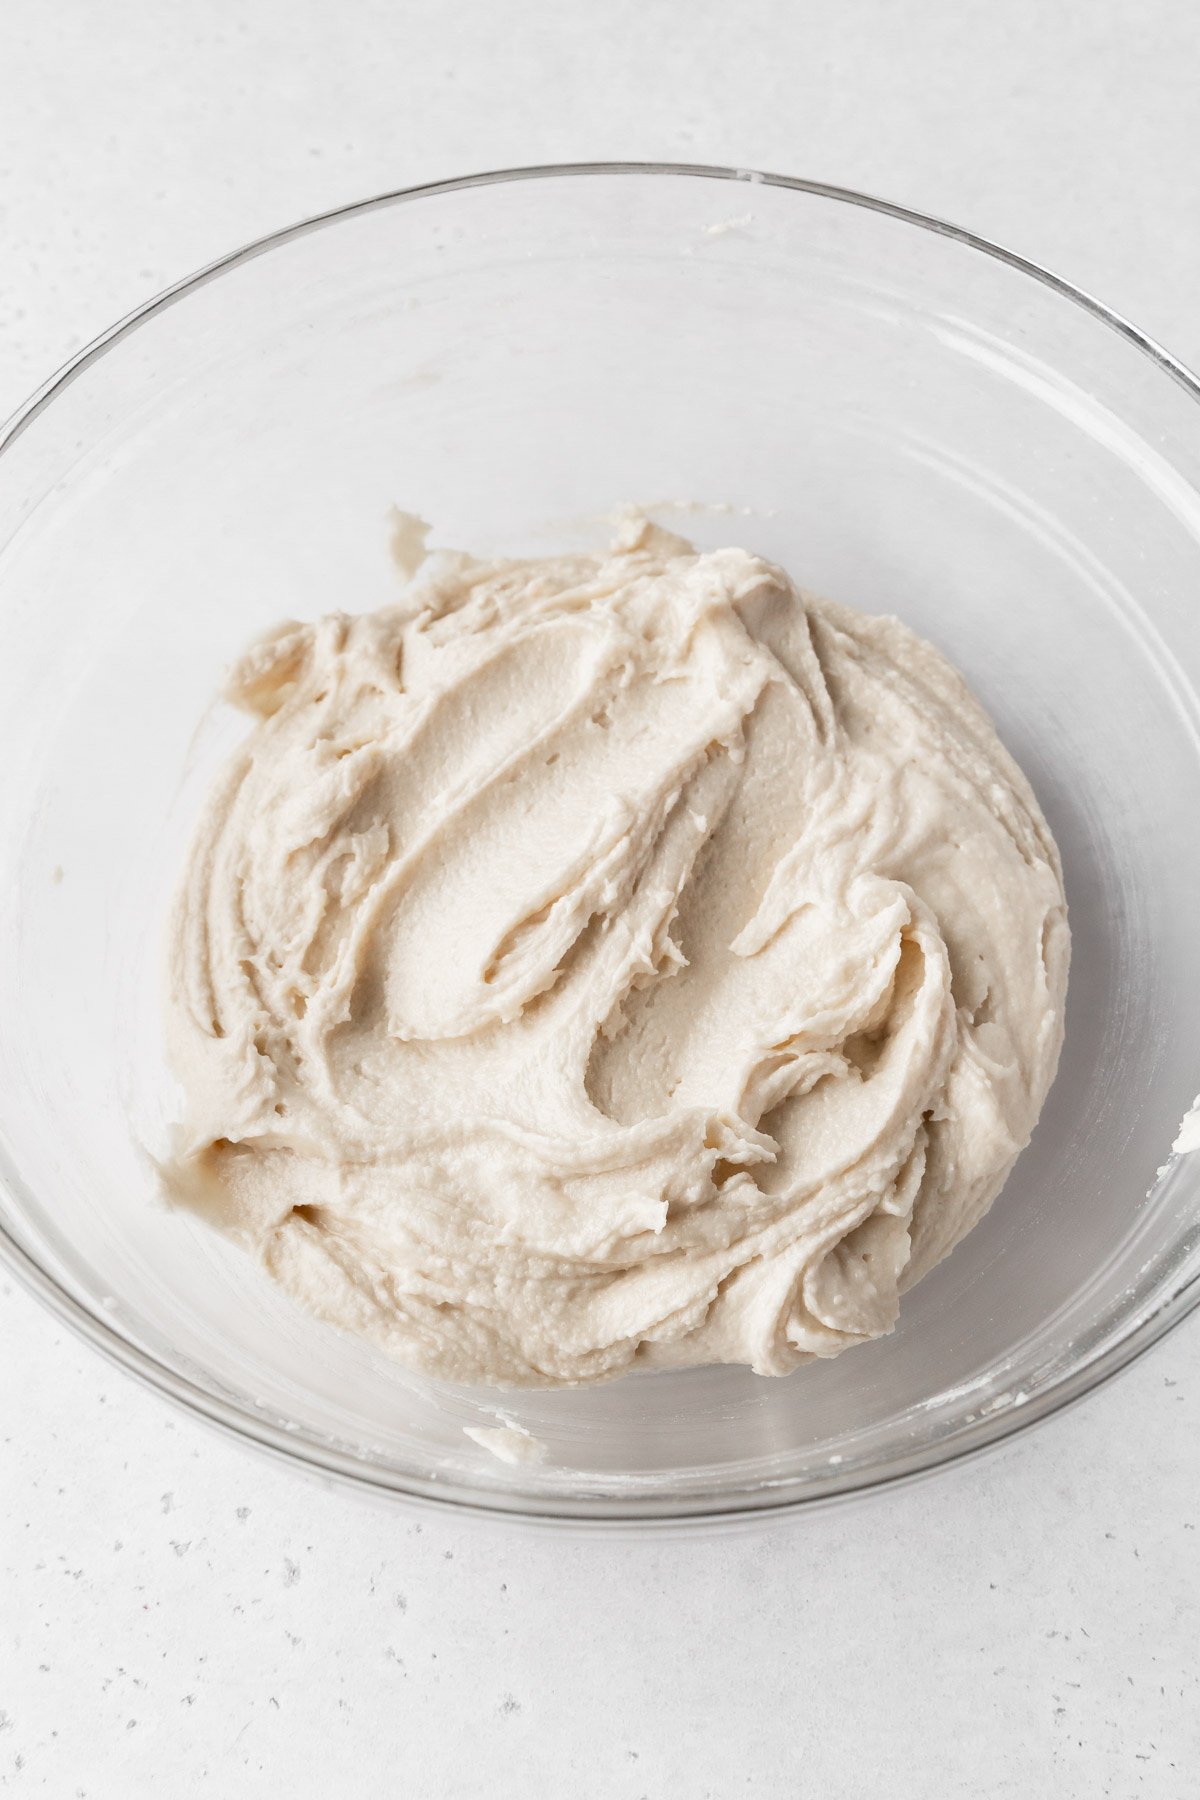 eggless pound cake batter is thick after the addition of dry ingredients.